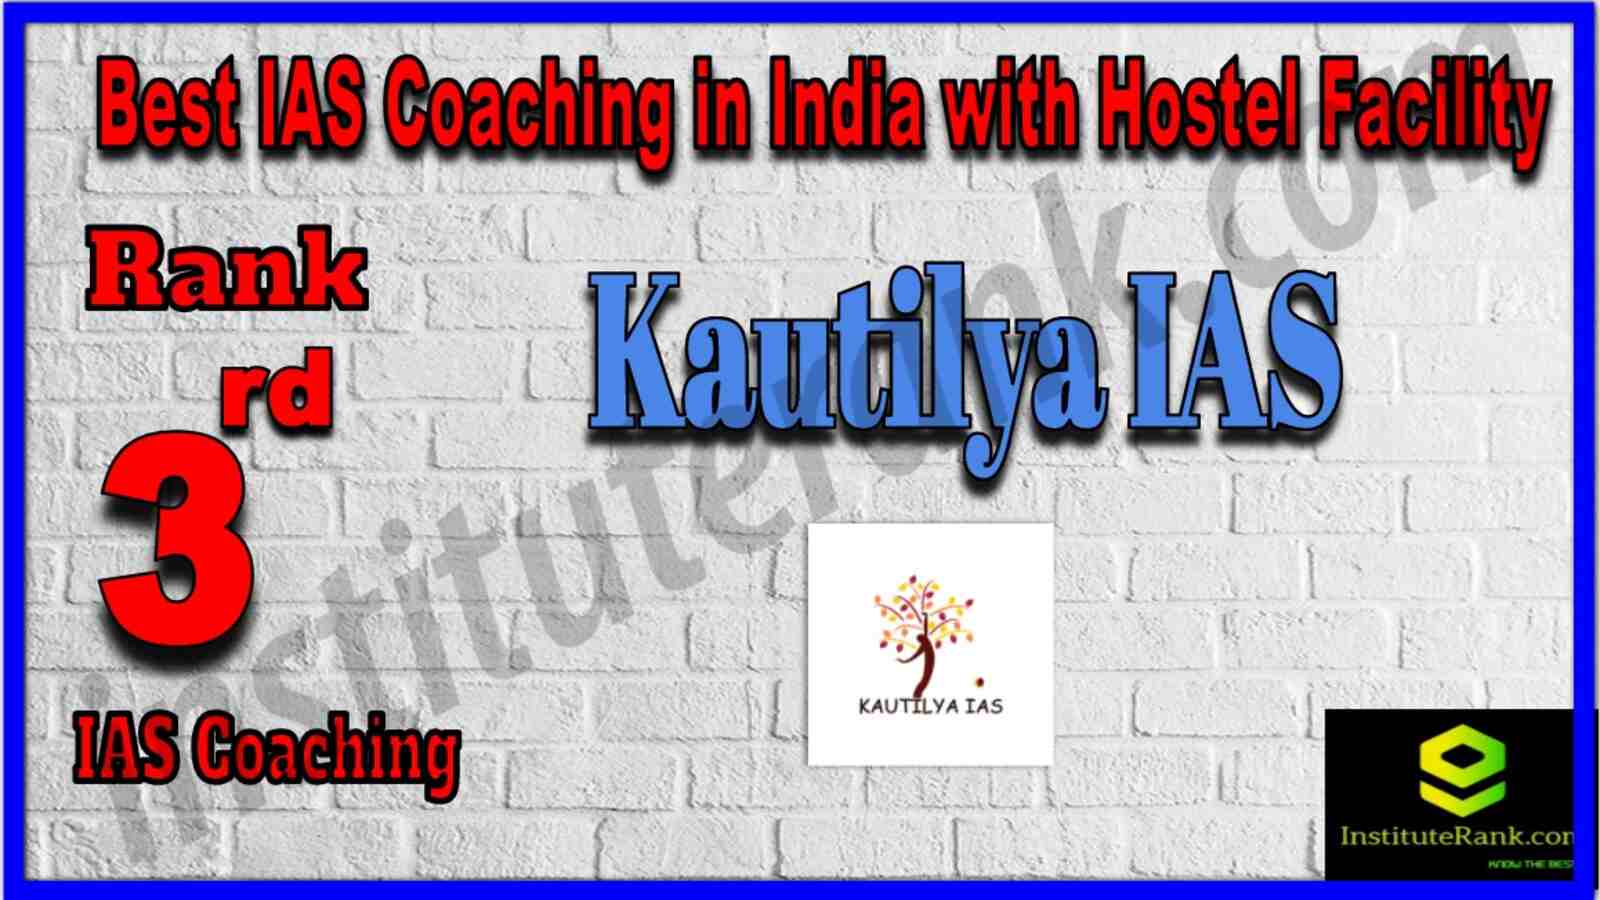 Rank 3 Best IAS Coaching in India With Hostel Facility